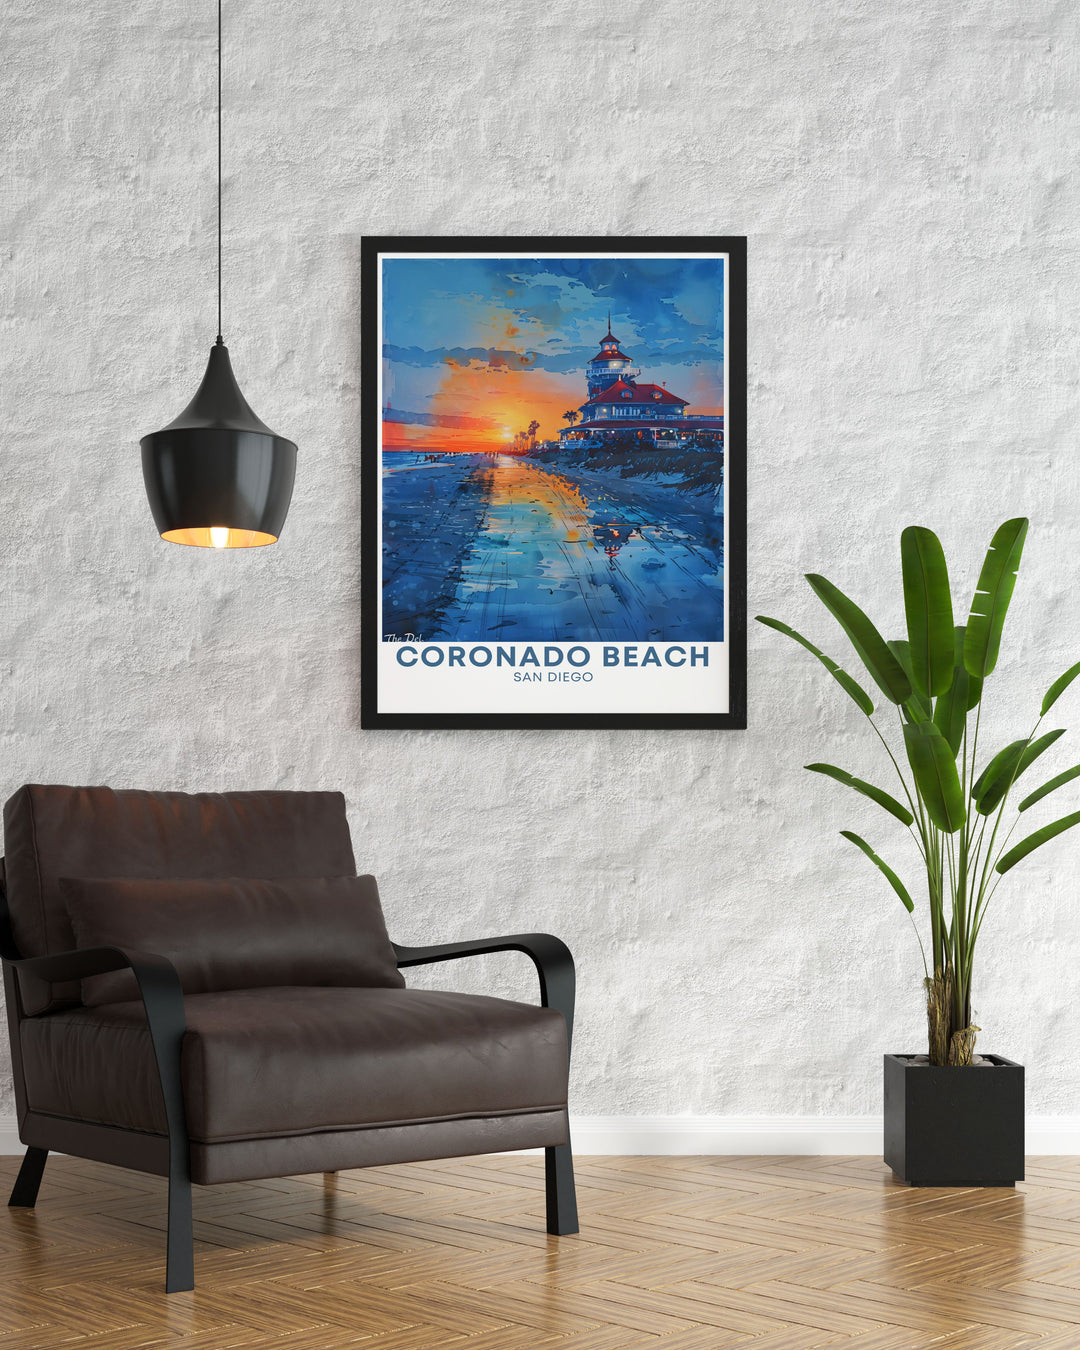 Enhance your living space with our Colorado Prints featuring the iconic Vail Ski slopes and the picturesque Hotel de Coronado. These prints are crafted to bring a touch of Colorados natural beauty and historical charm into your home.